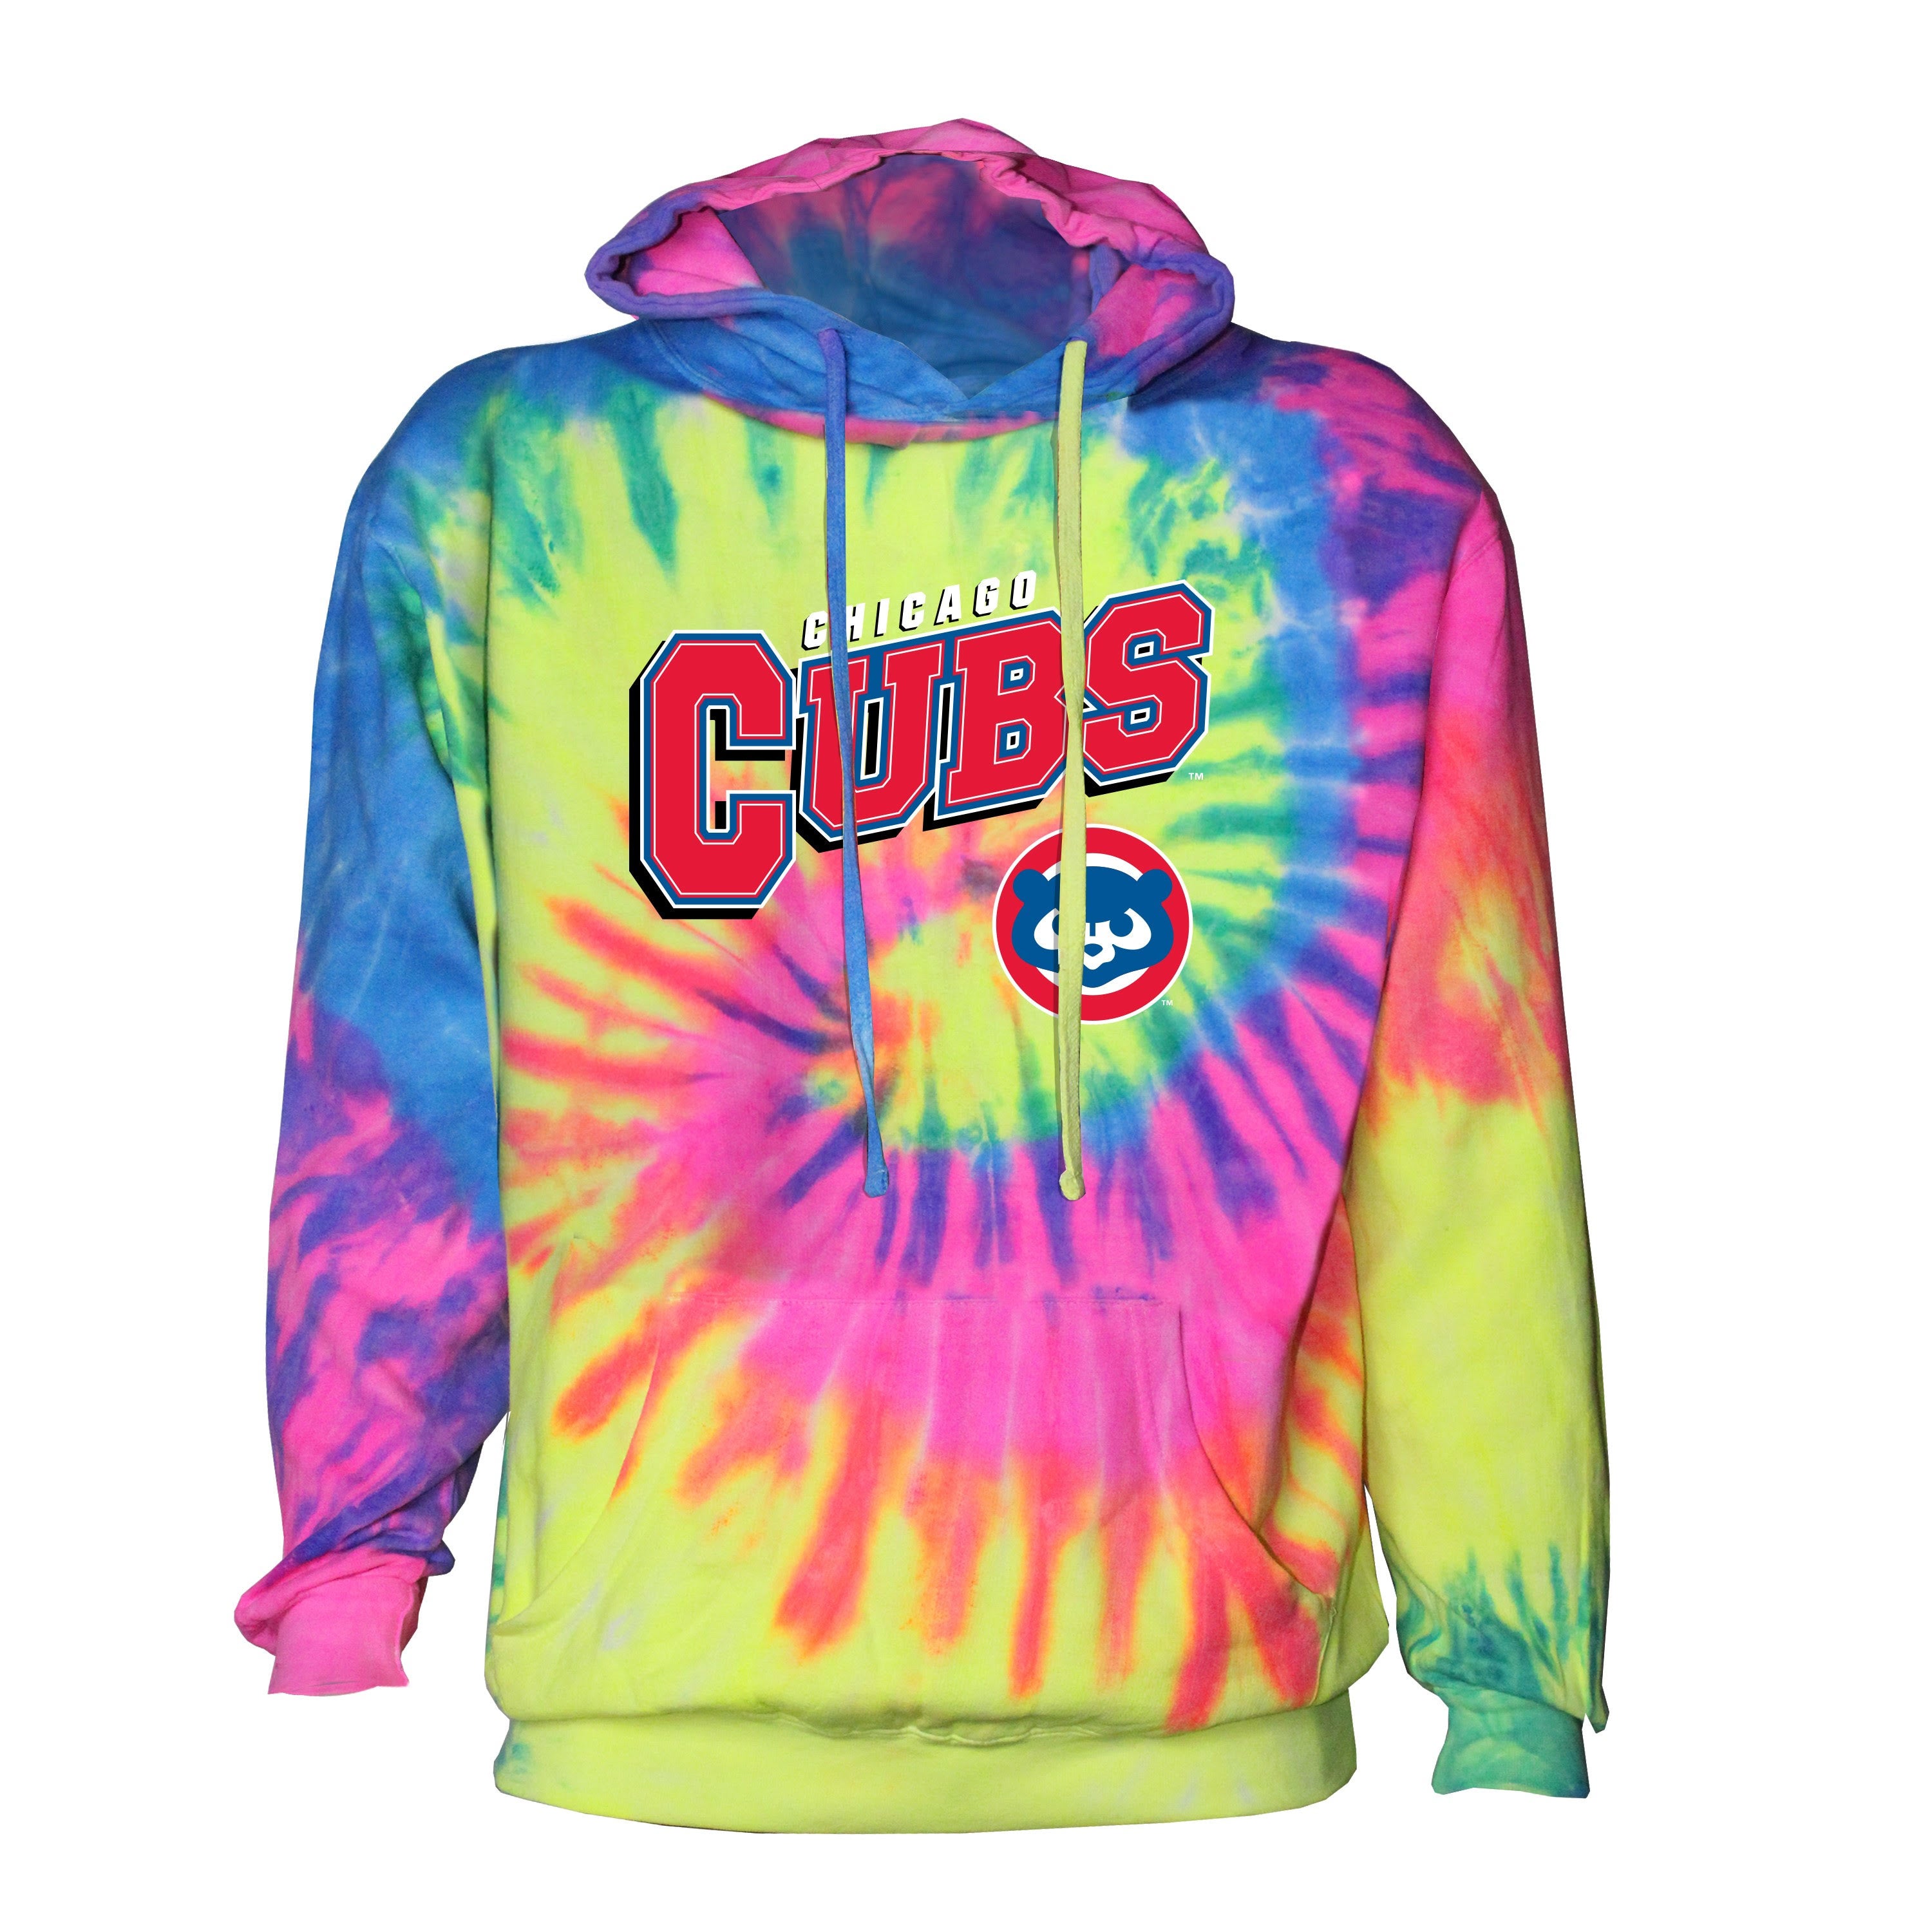 Chicago Cubs Youth V Tie-Dye T-Shirt